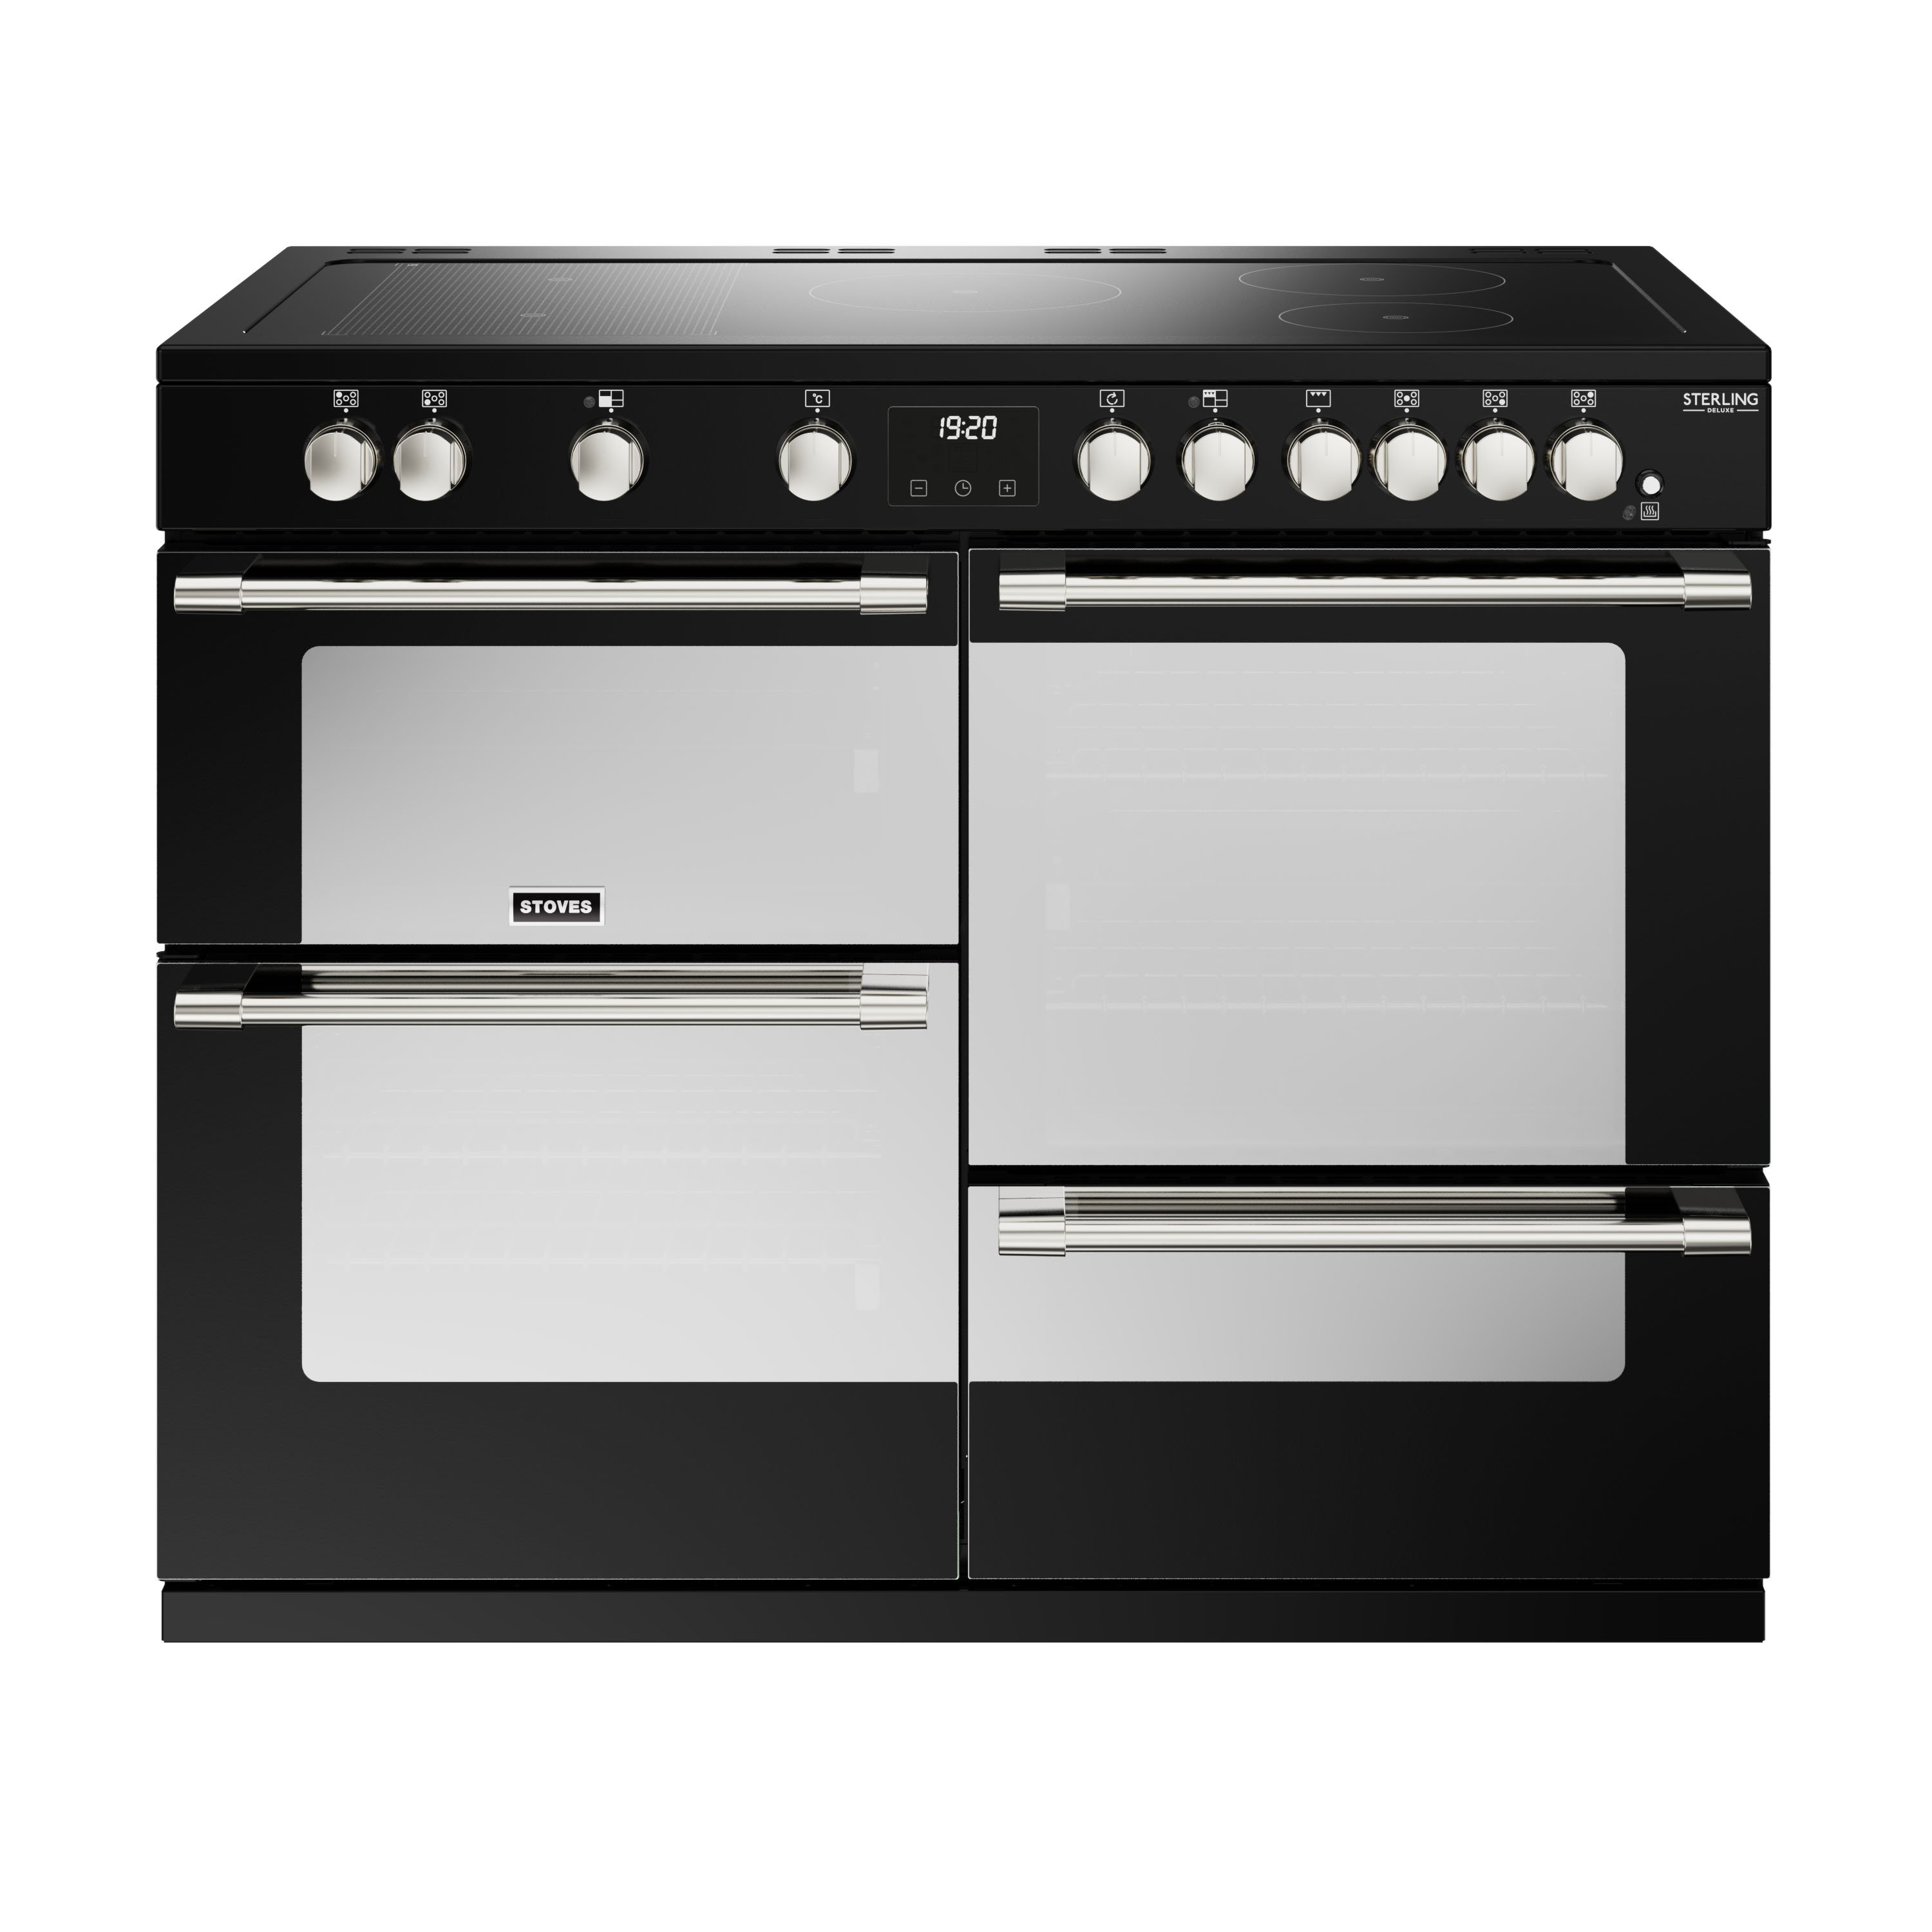 110cm electric induction range cooker with a 5 zone rotary control hob, conventional oven & grill, multifunction main oven with TrueTemp digital thermostat, fanned second oven and dedicated slow cook oven